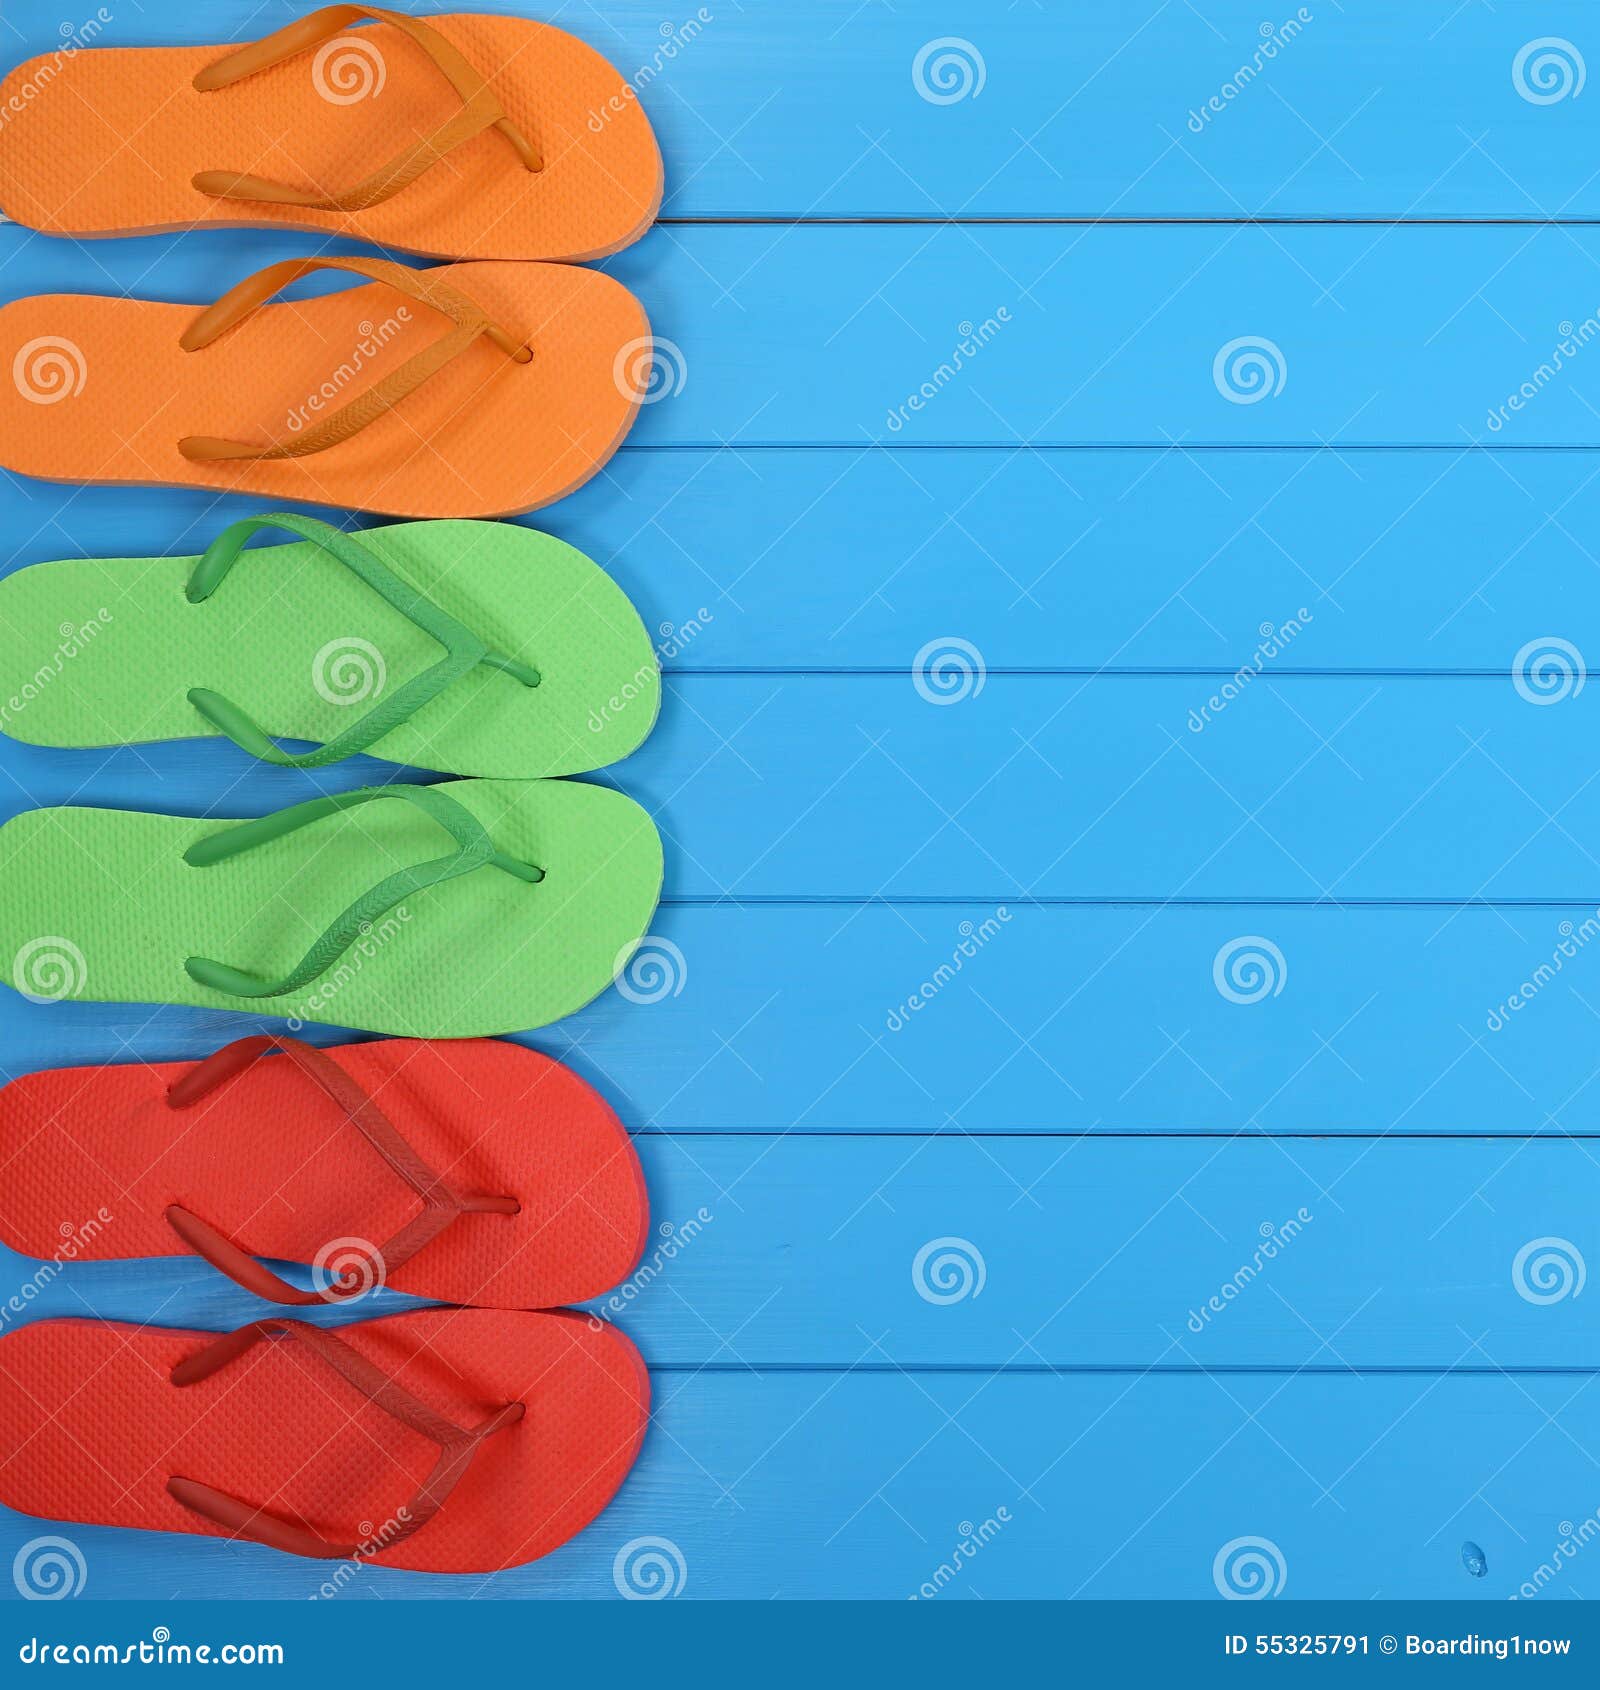 Flip Flops Sandals in Summer on Beach, Vacation with Copyspace Stock ...